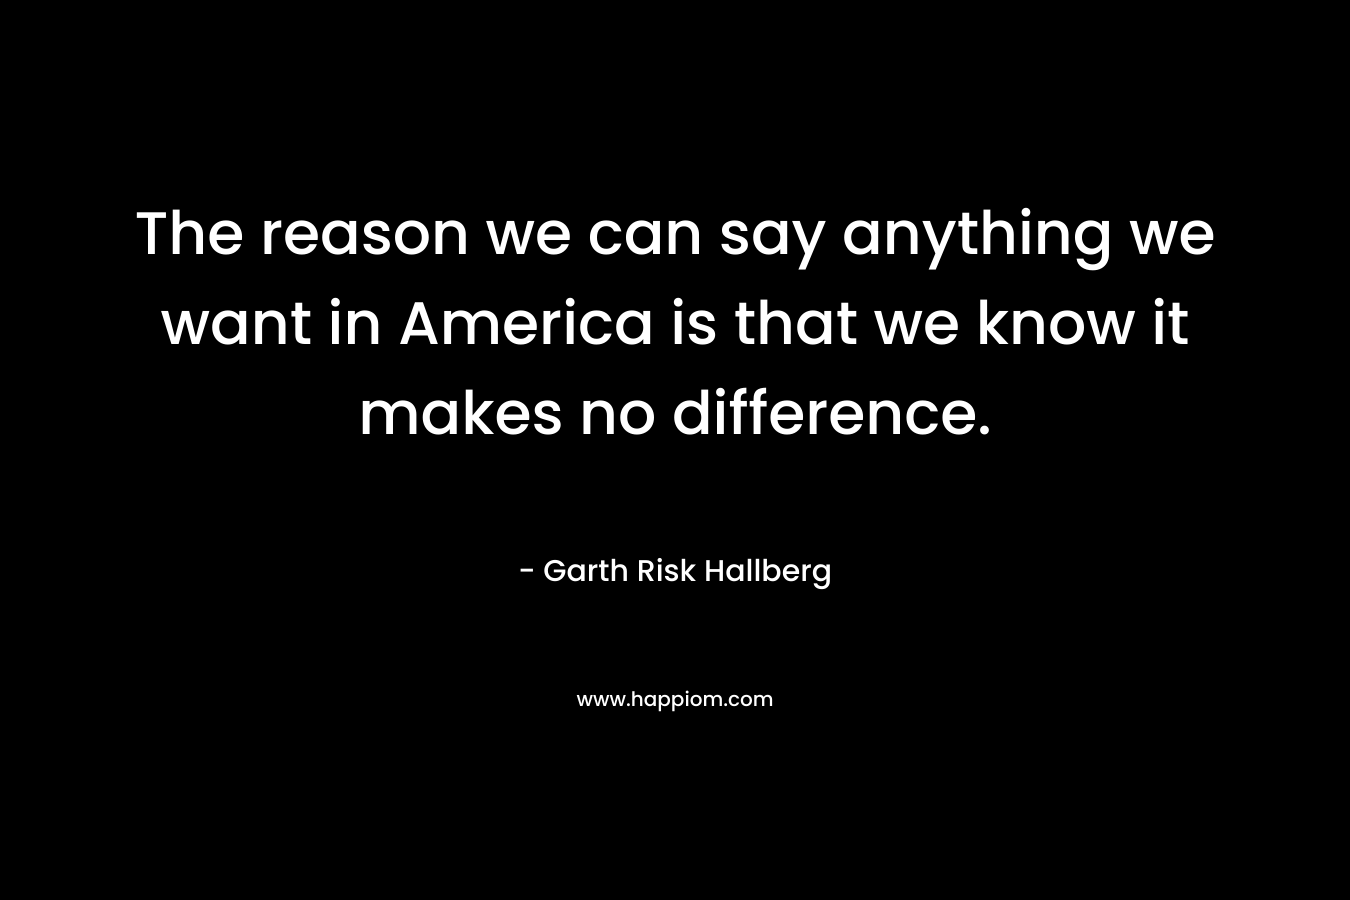 The reason we can say anything we want in America is that we know it makes no difference. – Garth Risk Hallberg